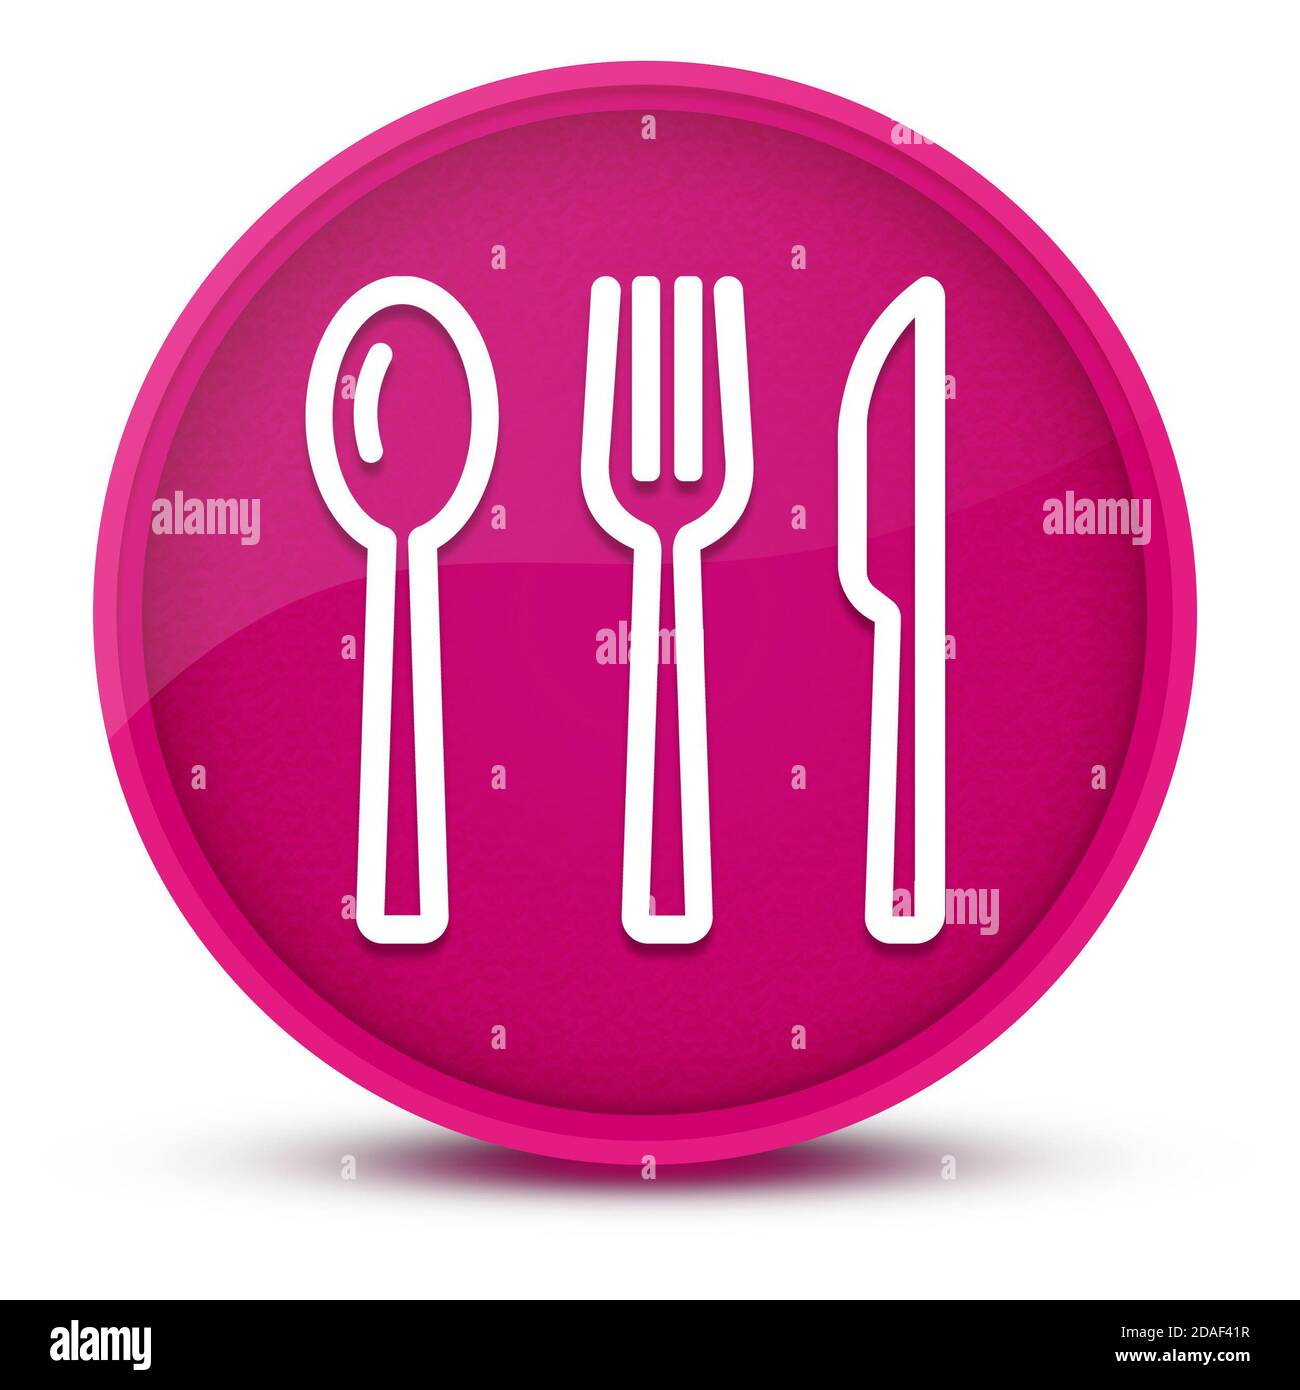 Cutlery luxurious glossy pink round button abstract illustration Stock Photo